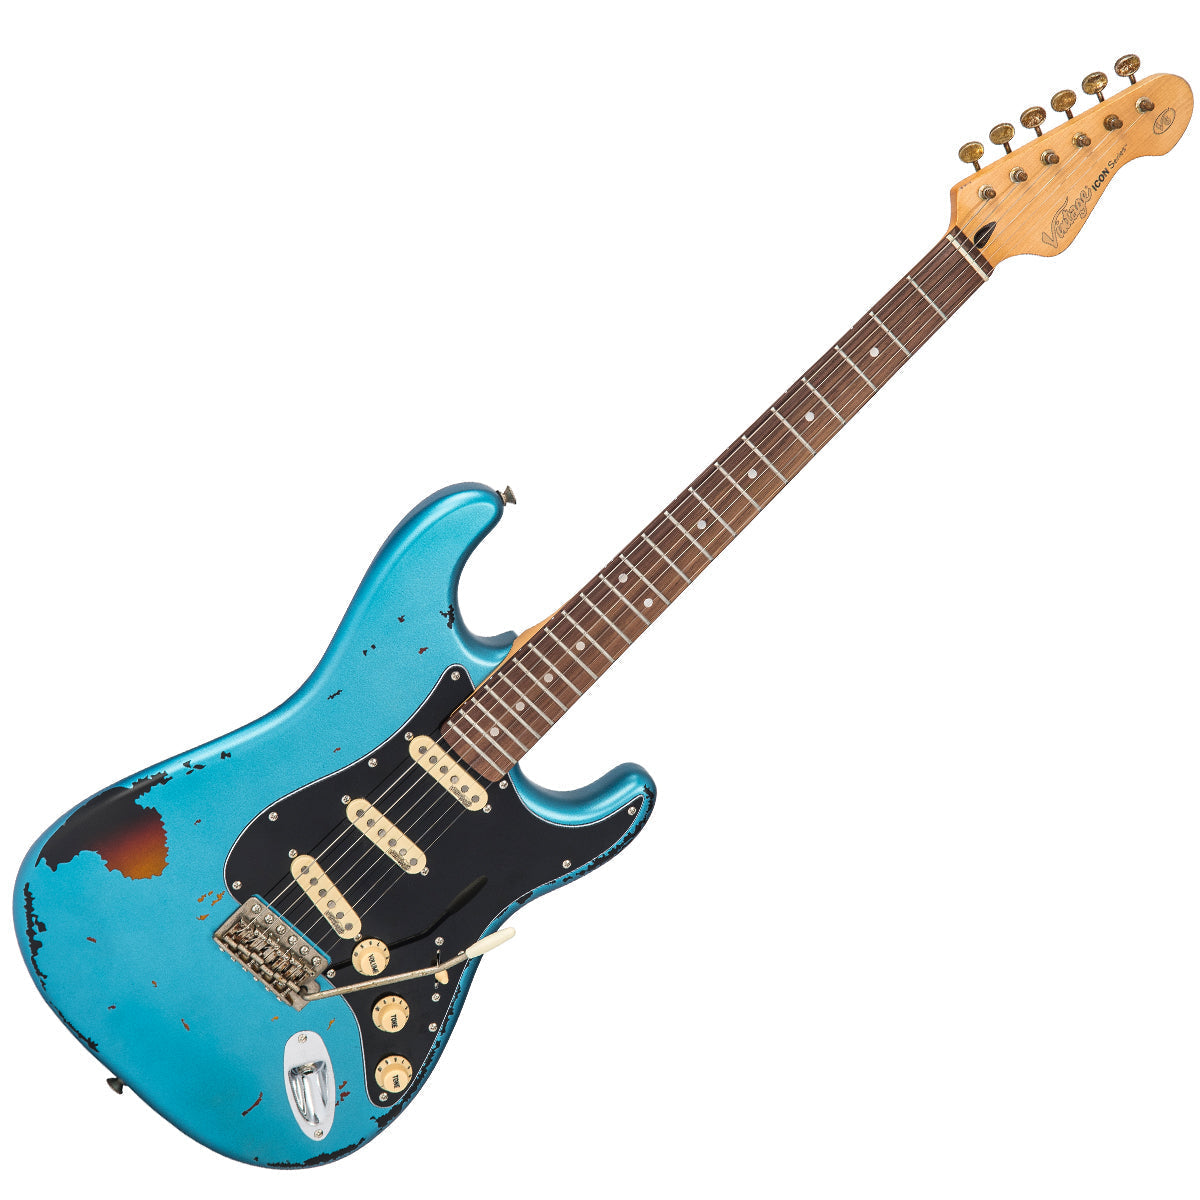 Electric Guitars - High Quality Electric Guitars for Sale